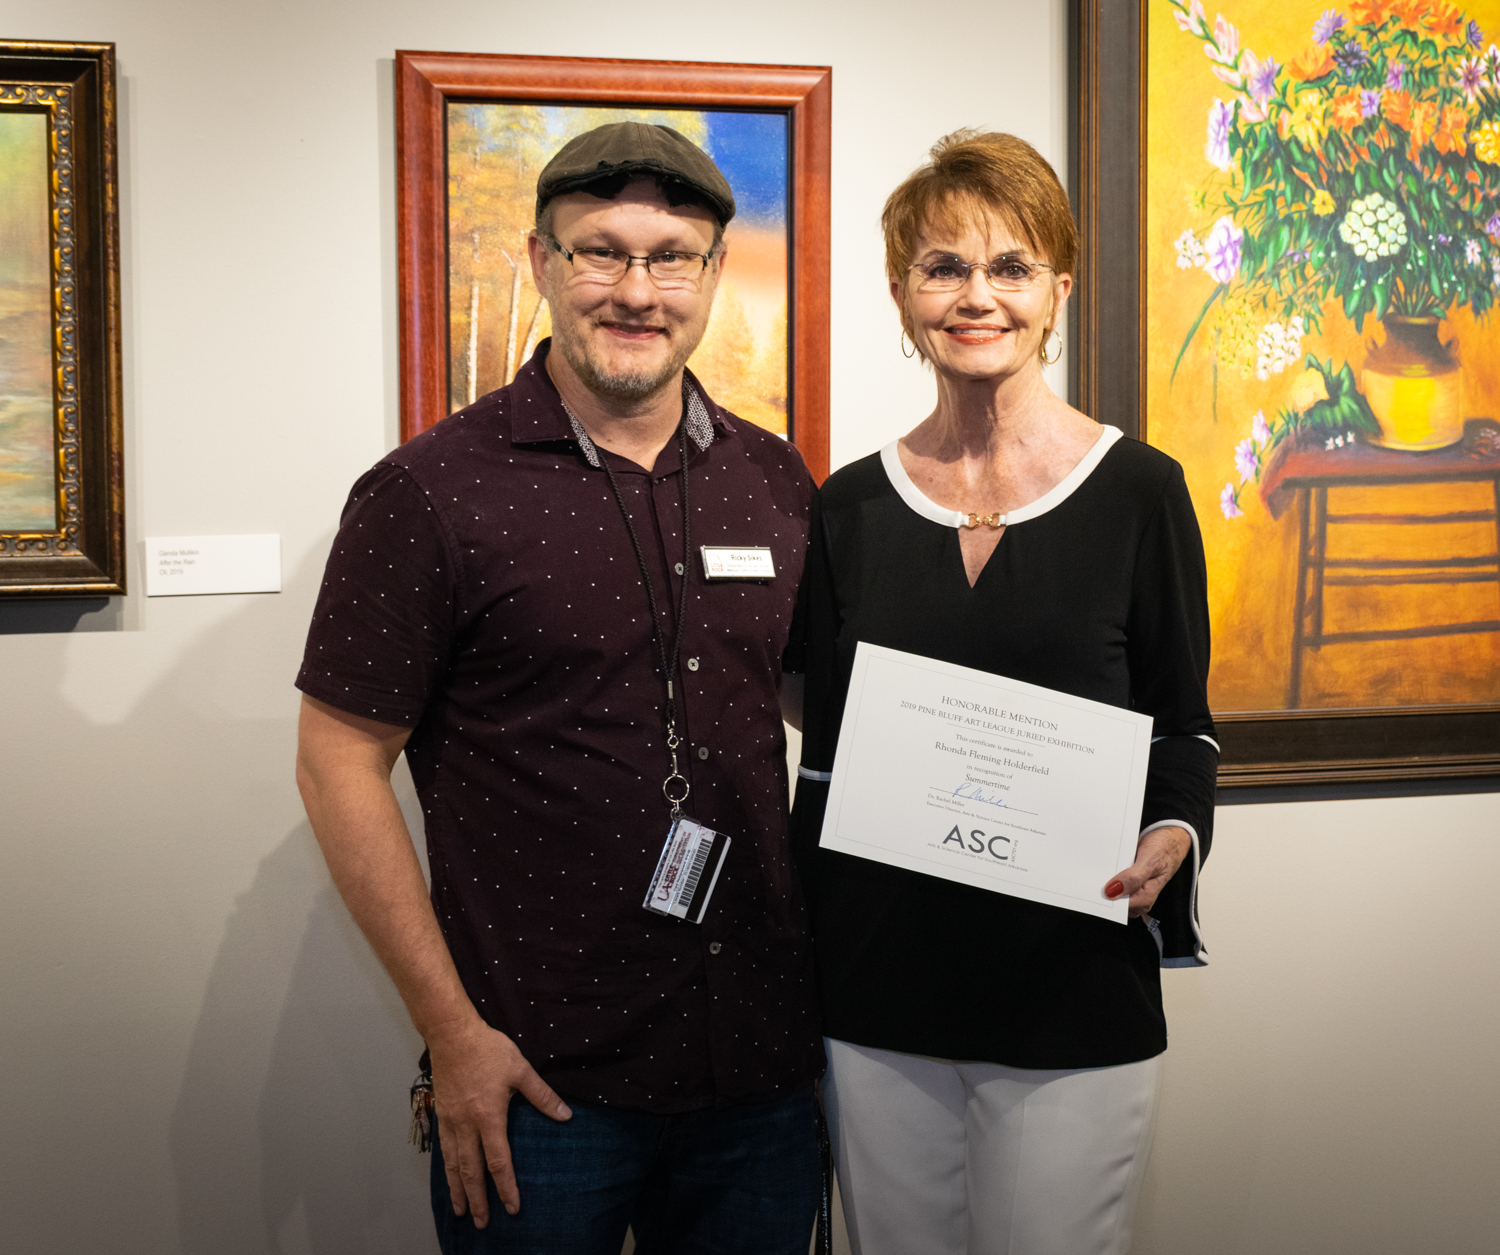  Rhonda Fleming Holderfield (right, with juror Ricky Sikes) was awarded an Honorable Mention for her acrylic painting Summertime. 